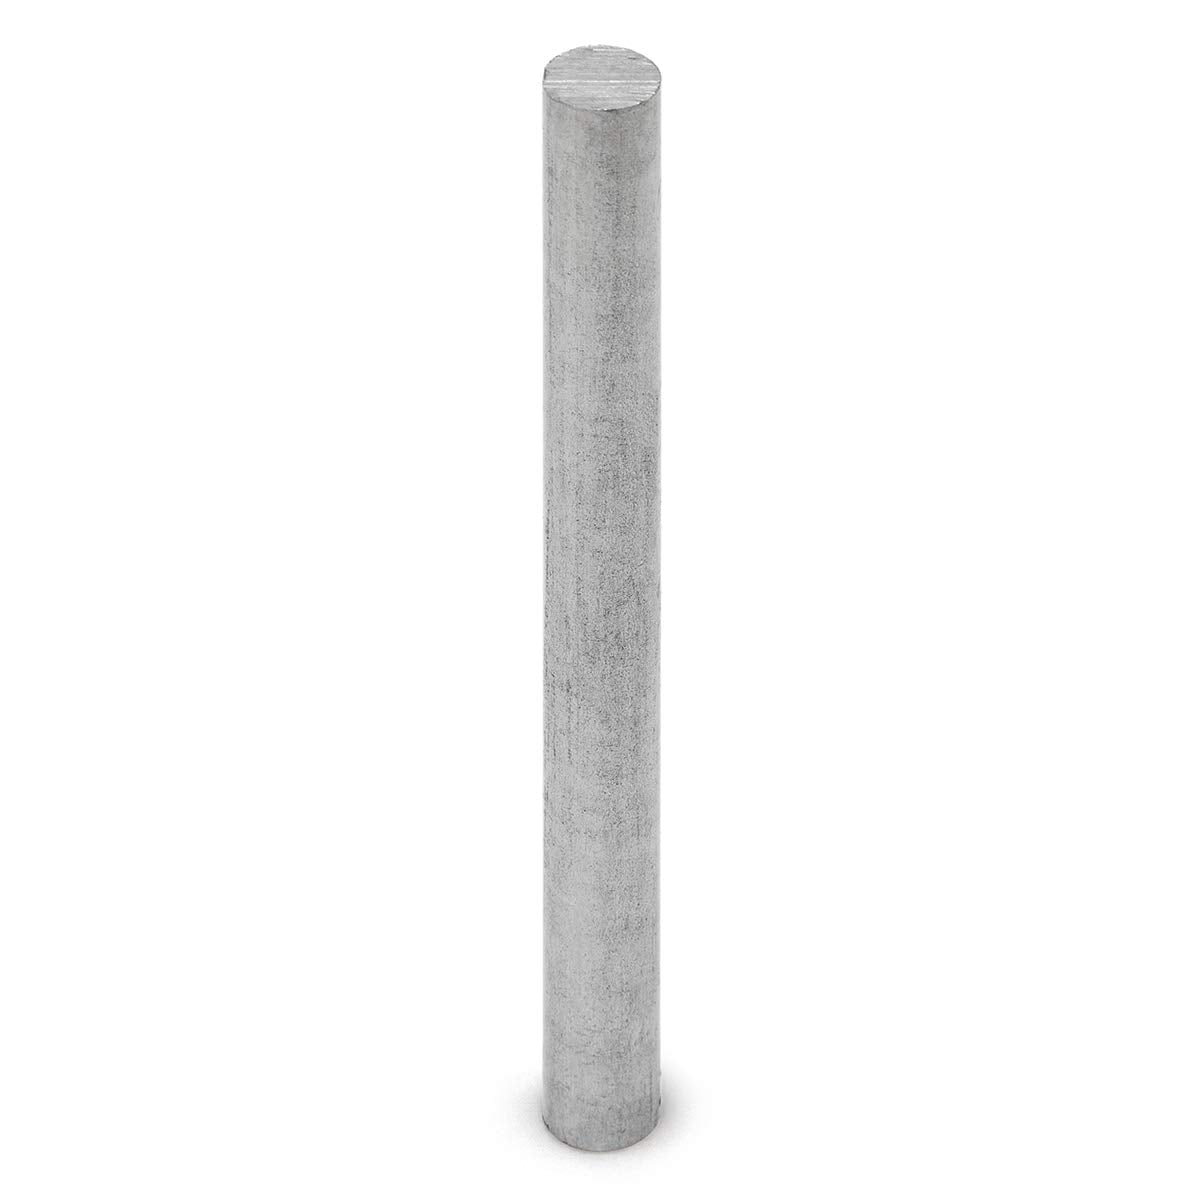 inches Ideal Core for making electromagnets. 0.5 dia X 6 long Soft Iron Rod 